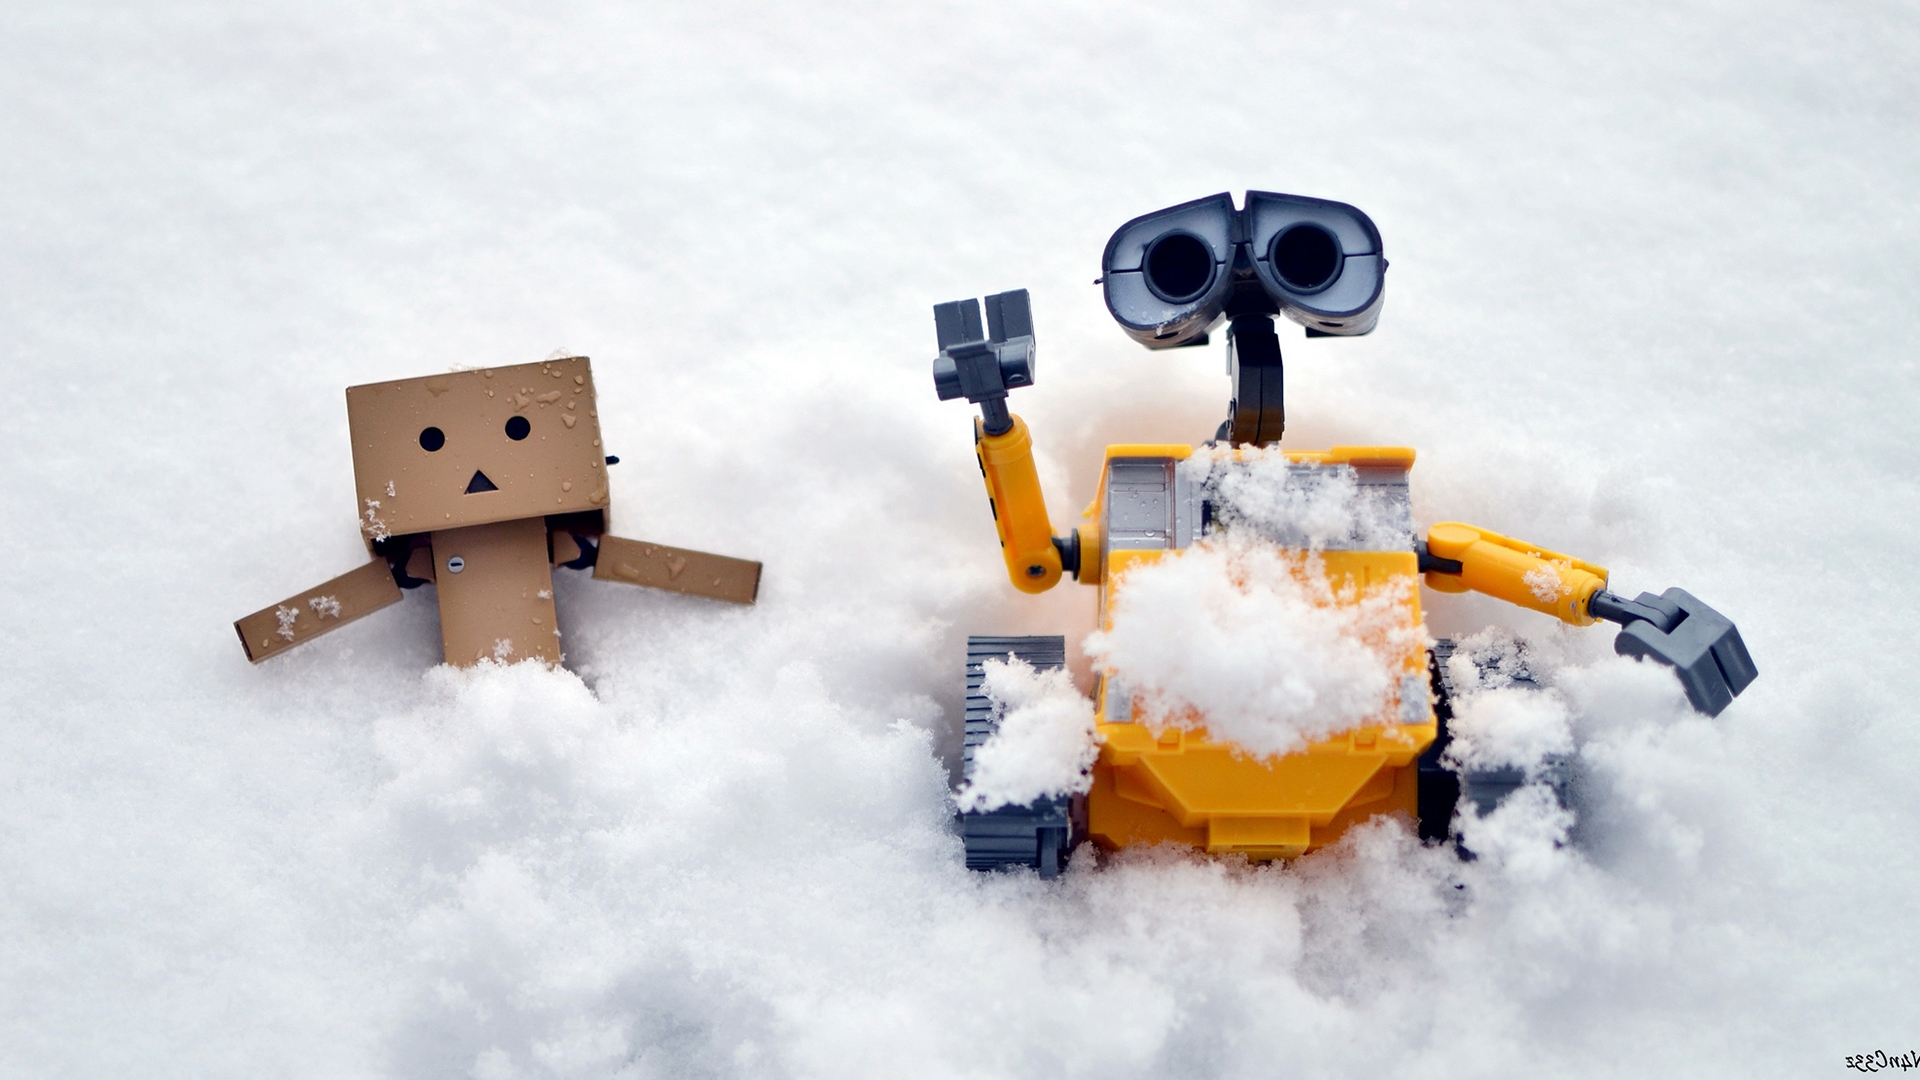 Danbo and Wall-E in Snow Wallpapers HD / Desktop and Mobile Backgrounds